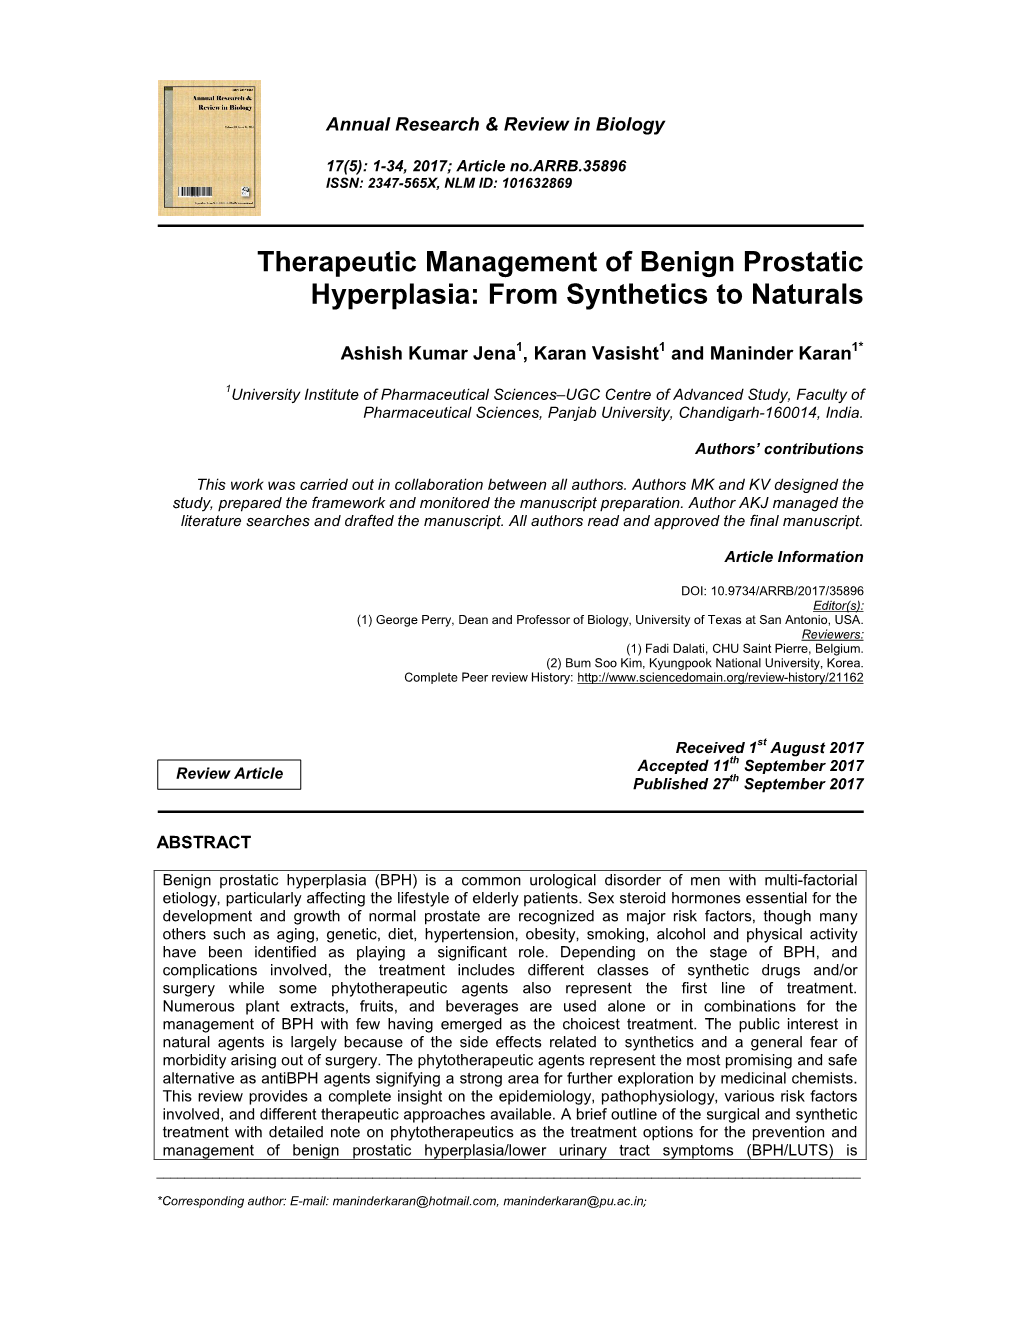 Therapeutic Management of Benign Prostatic Hyperplasia: from Synthetics to Naturals